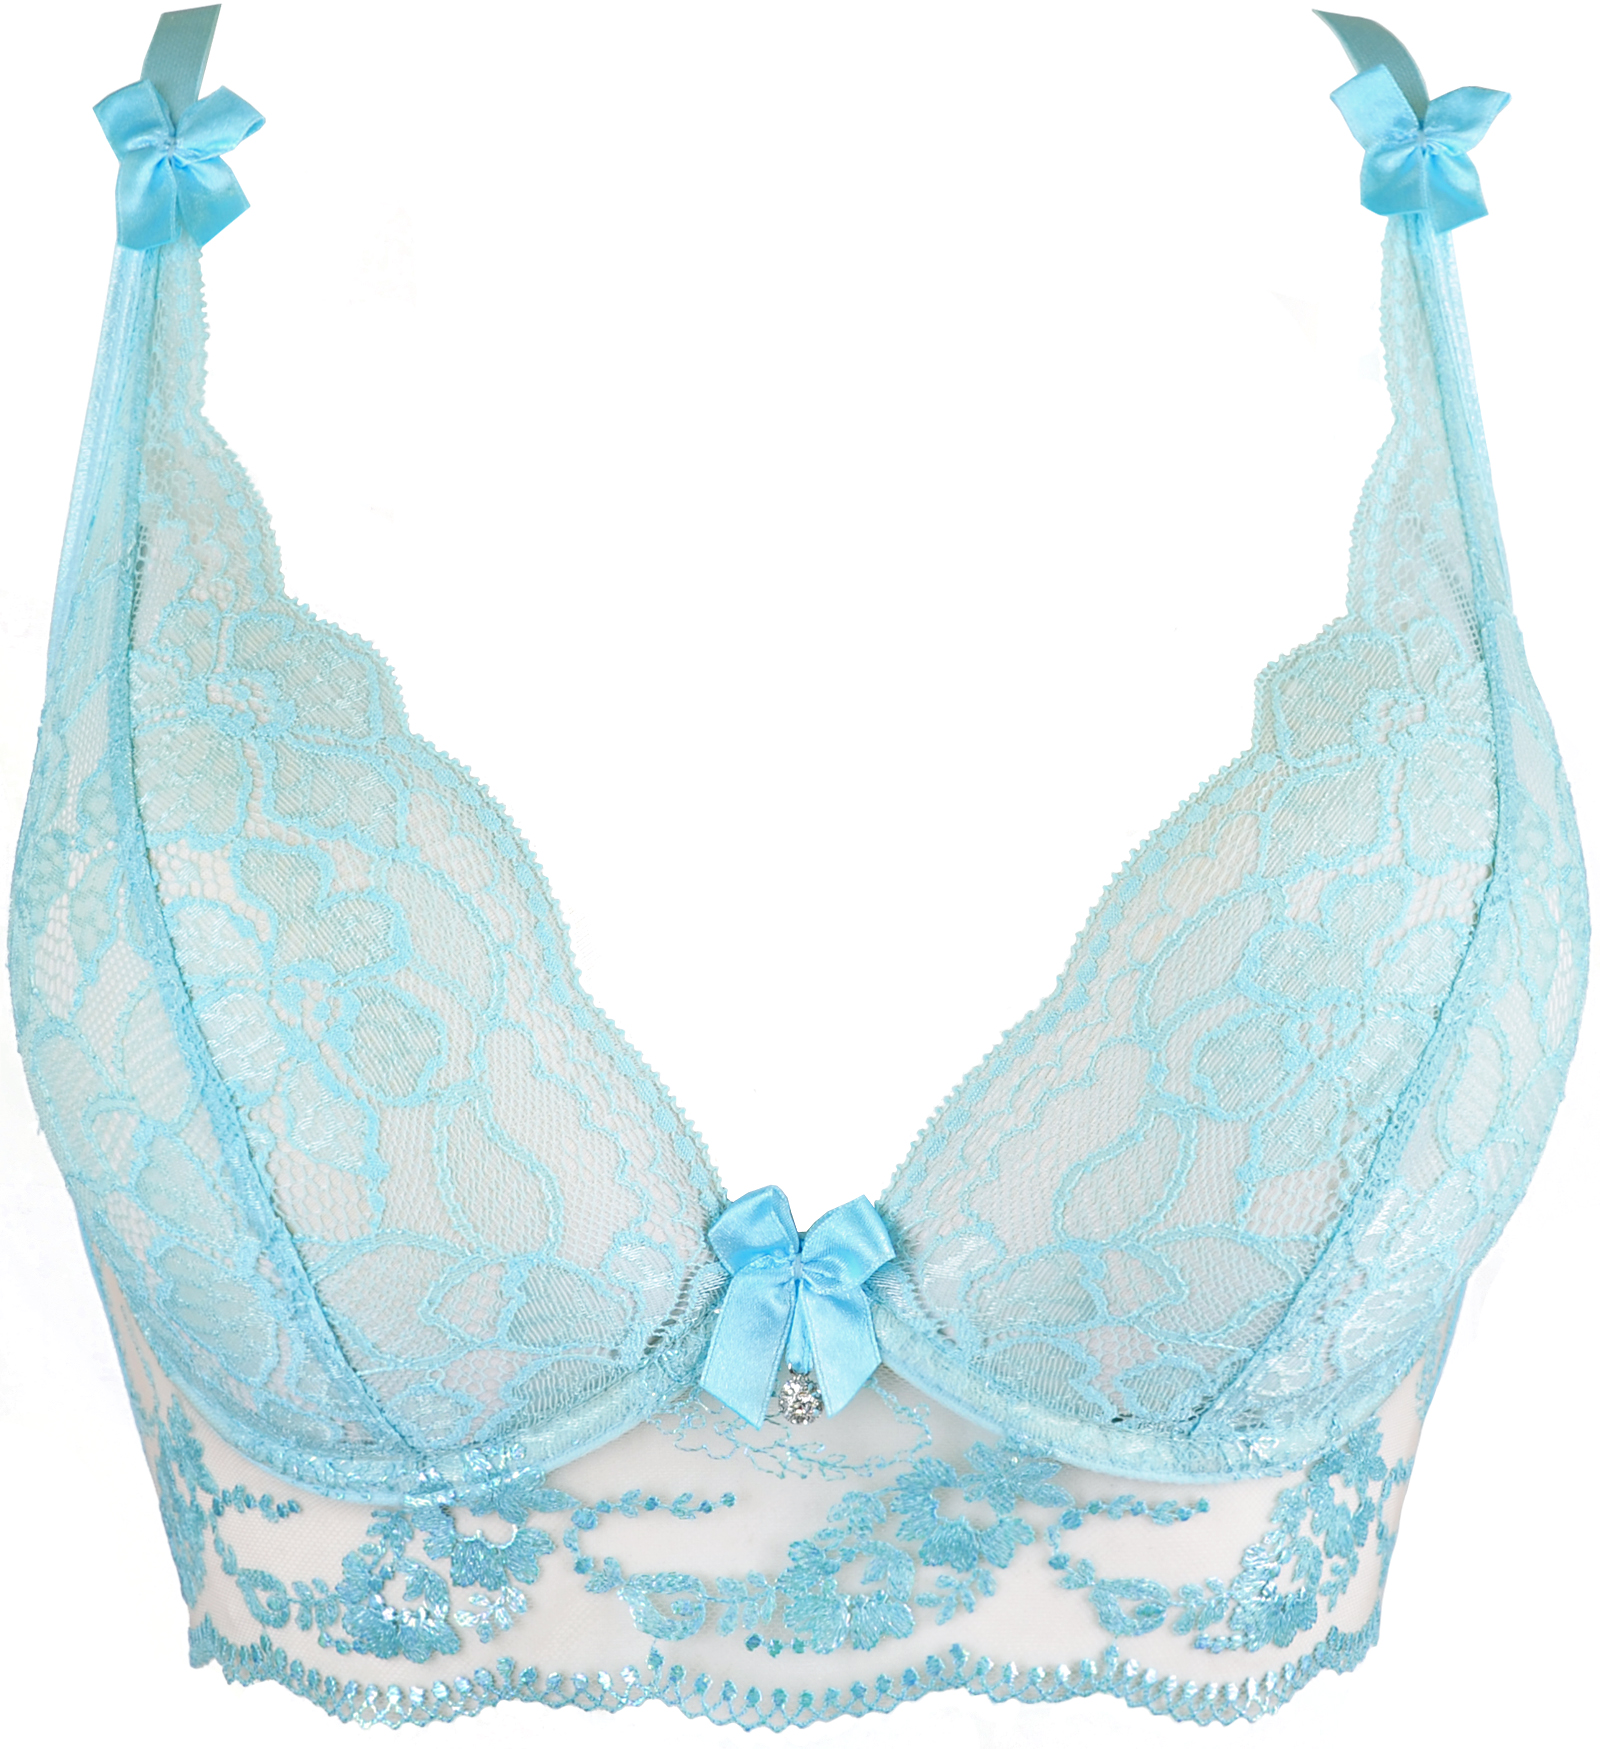 Axami Transparent Bustier Floral Lace Bra in Mint